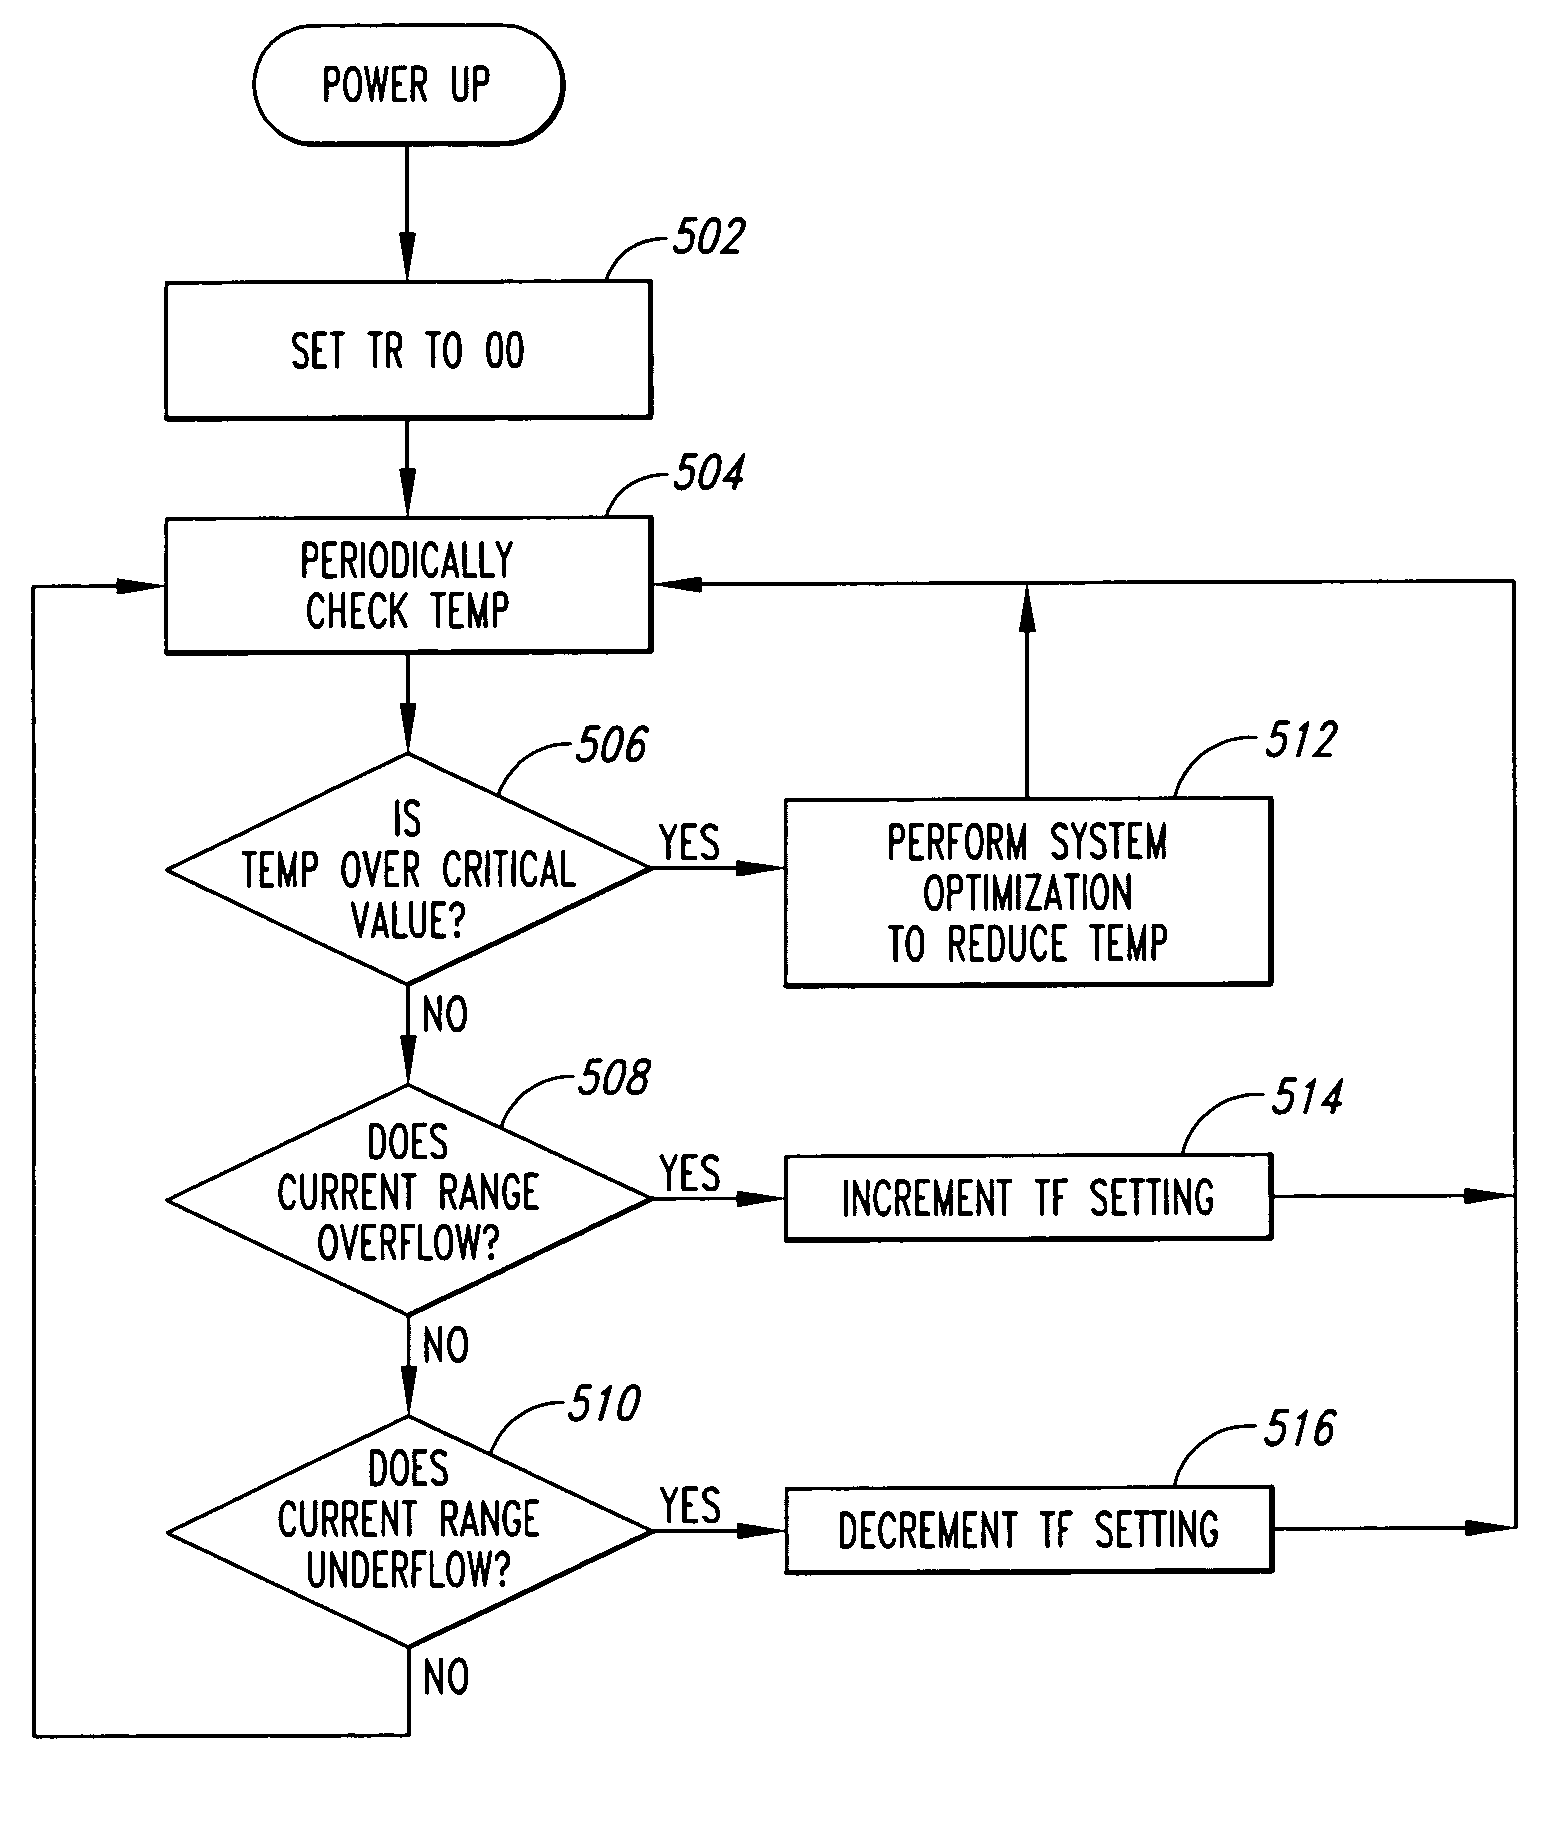 System and method for providing temperature data from a memory device having a temperature sensor